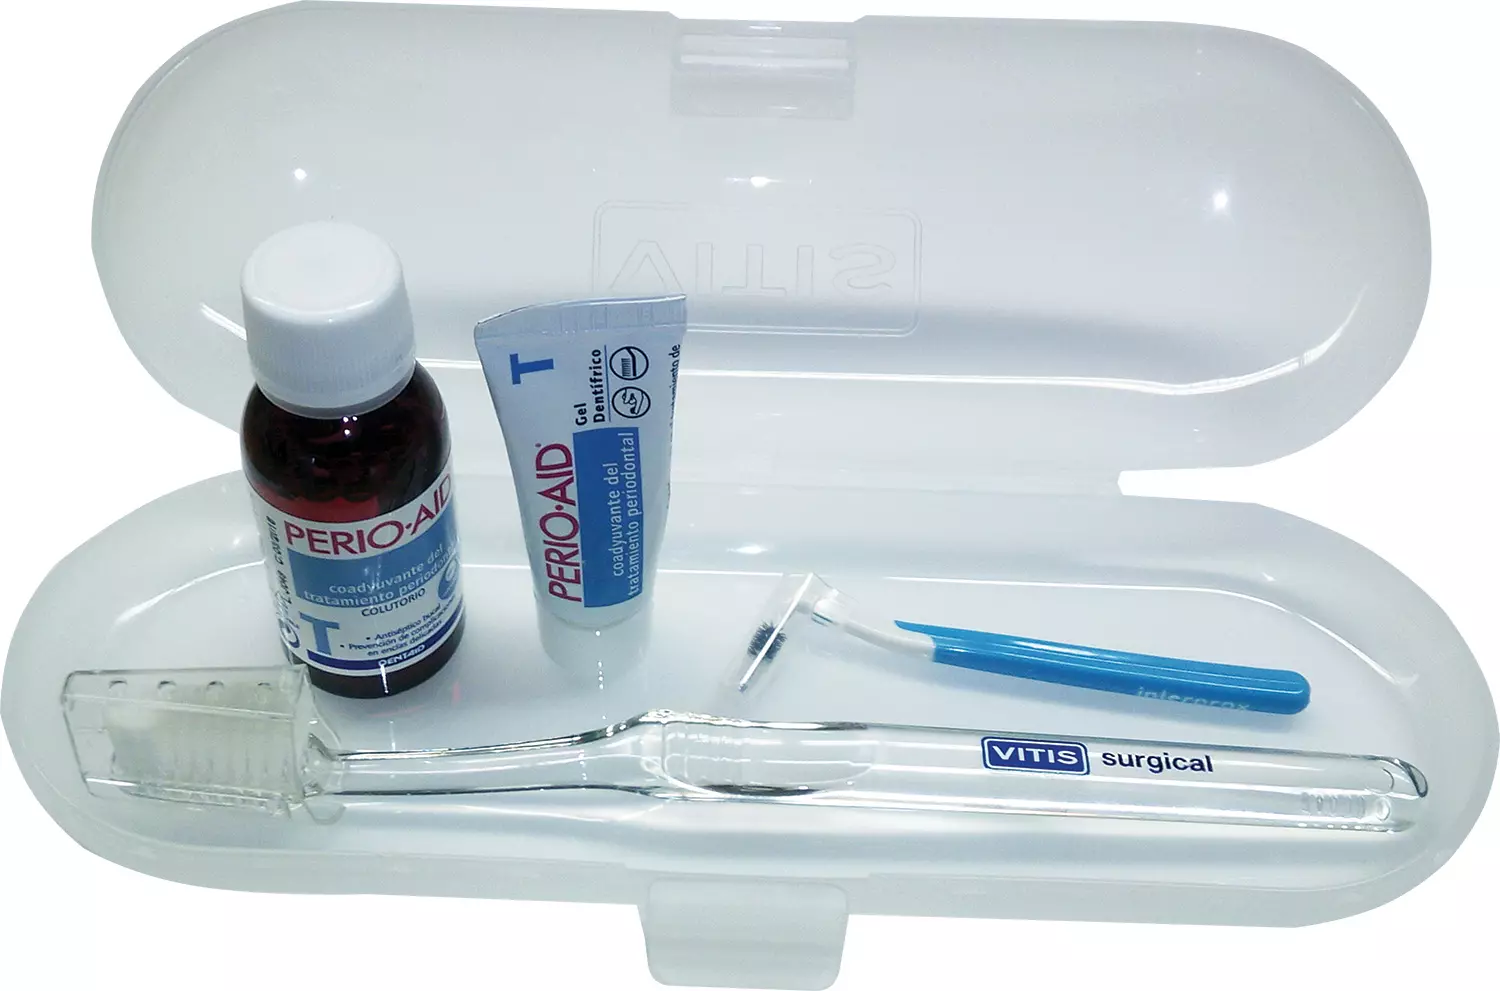 AKCIÓ - Perio Aid Kit 8 ml+30 ml+Surgical fogkefe+IPXconical (Blue) 3+1